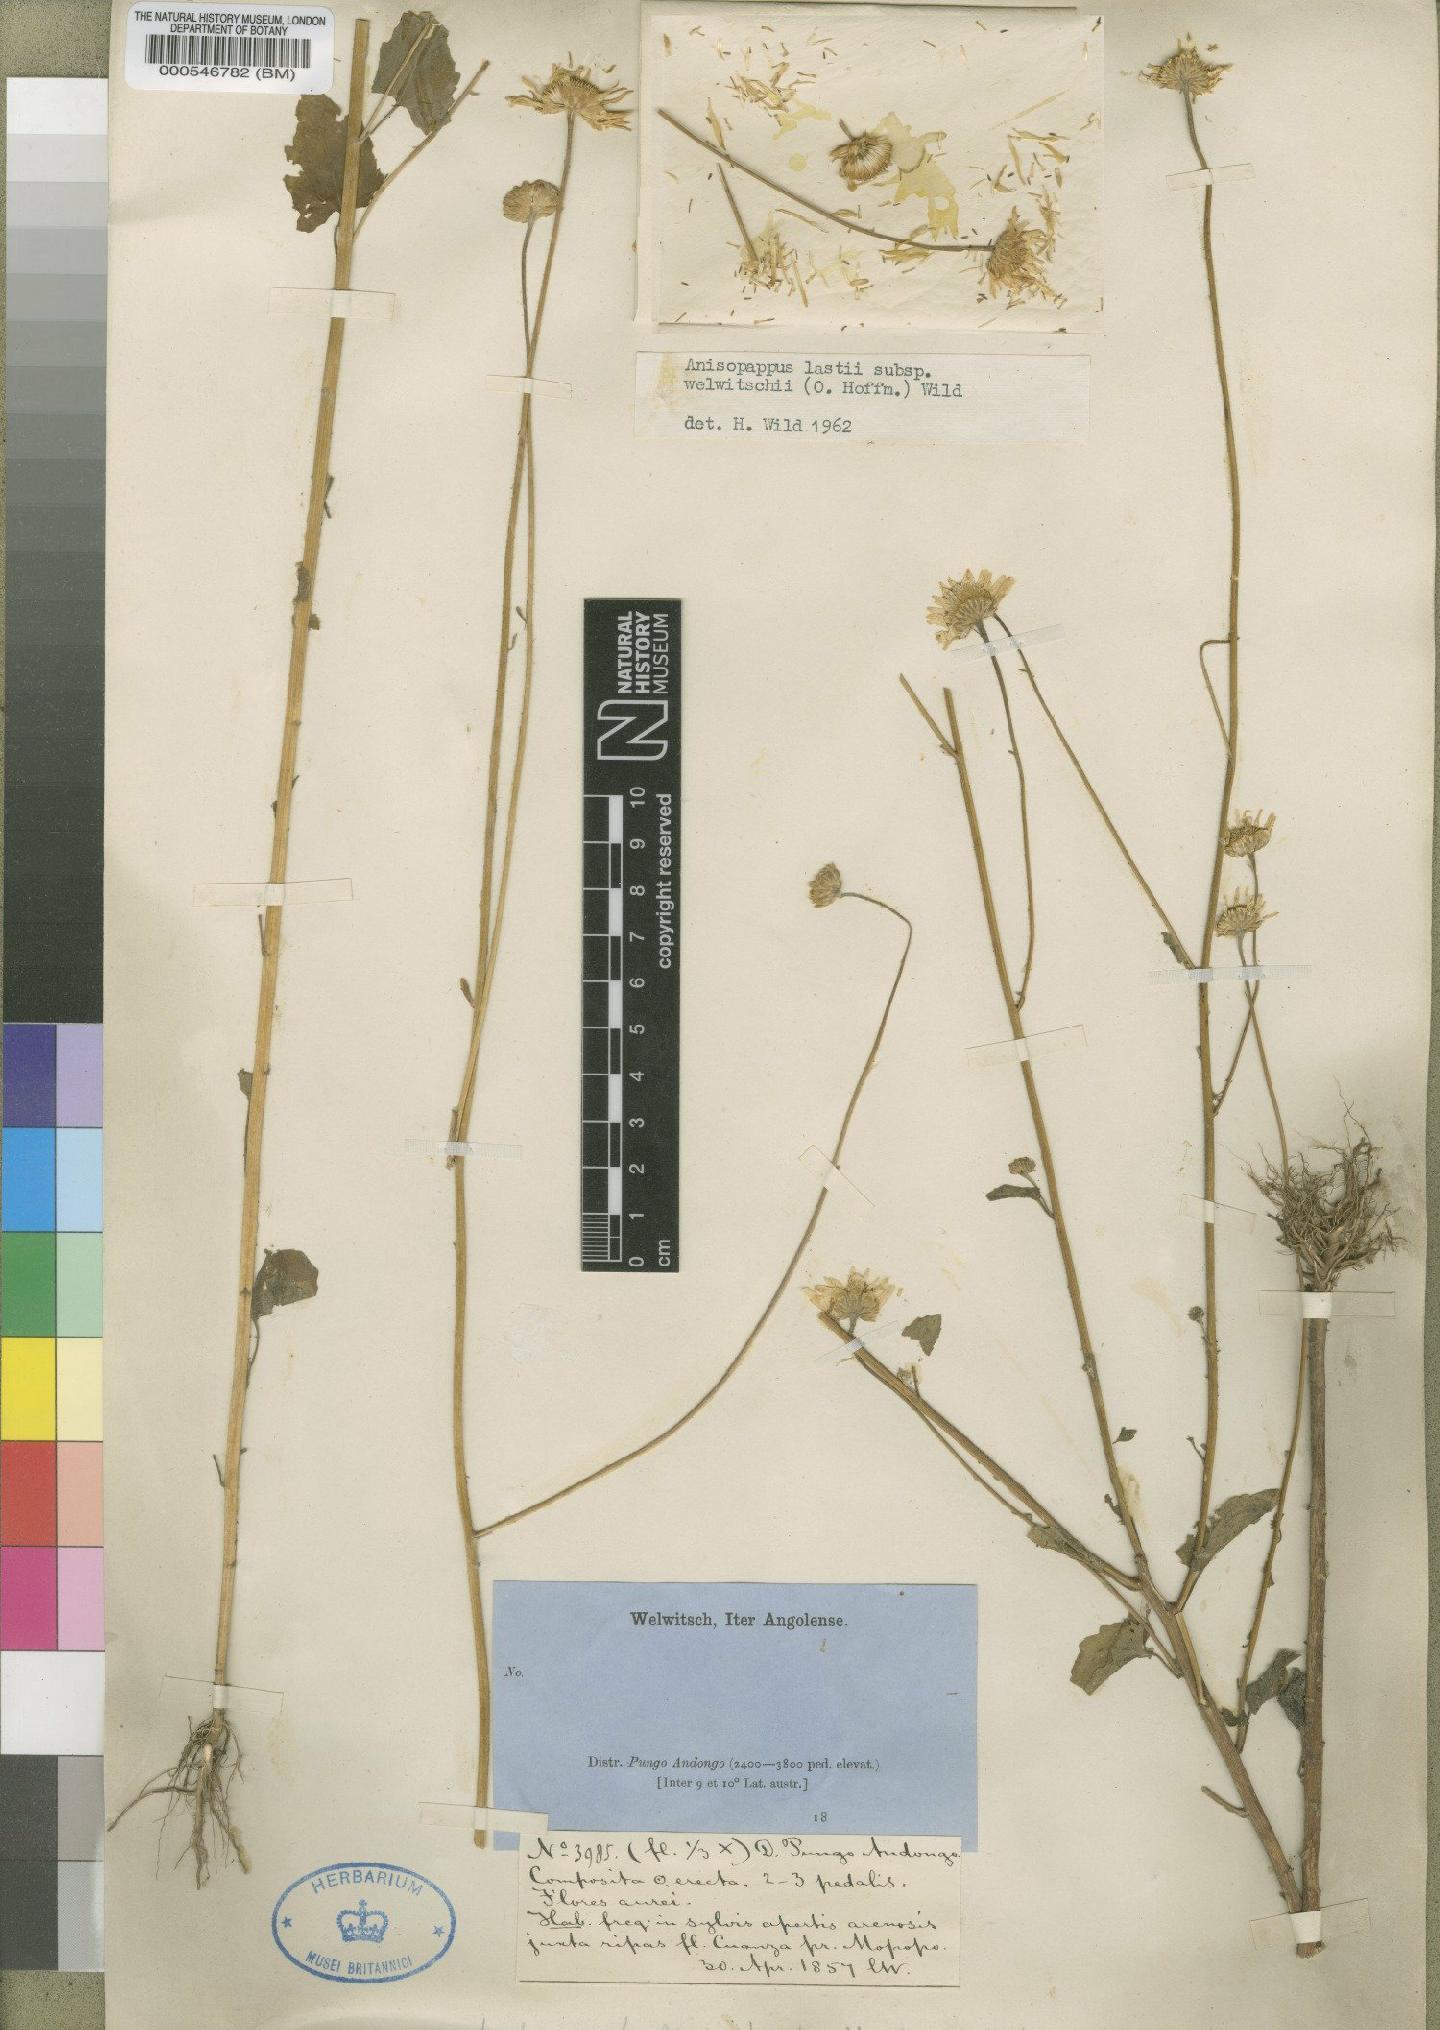 To NHMUK collection (Anisopappus lastii subsp. welwitschii (O.Hoffm.) Wild; Type; NHMUK:ecatalogue:4528514)